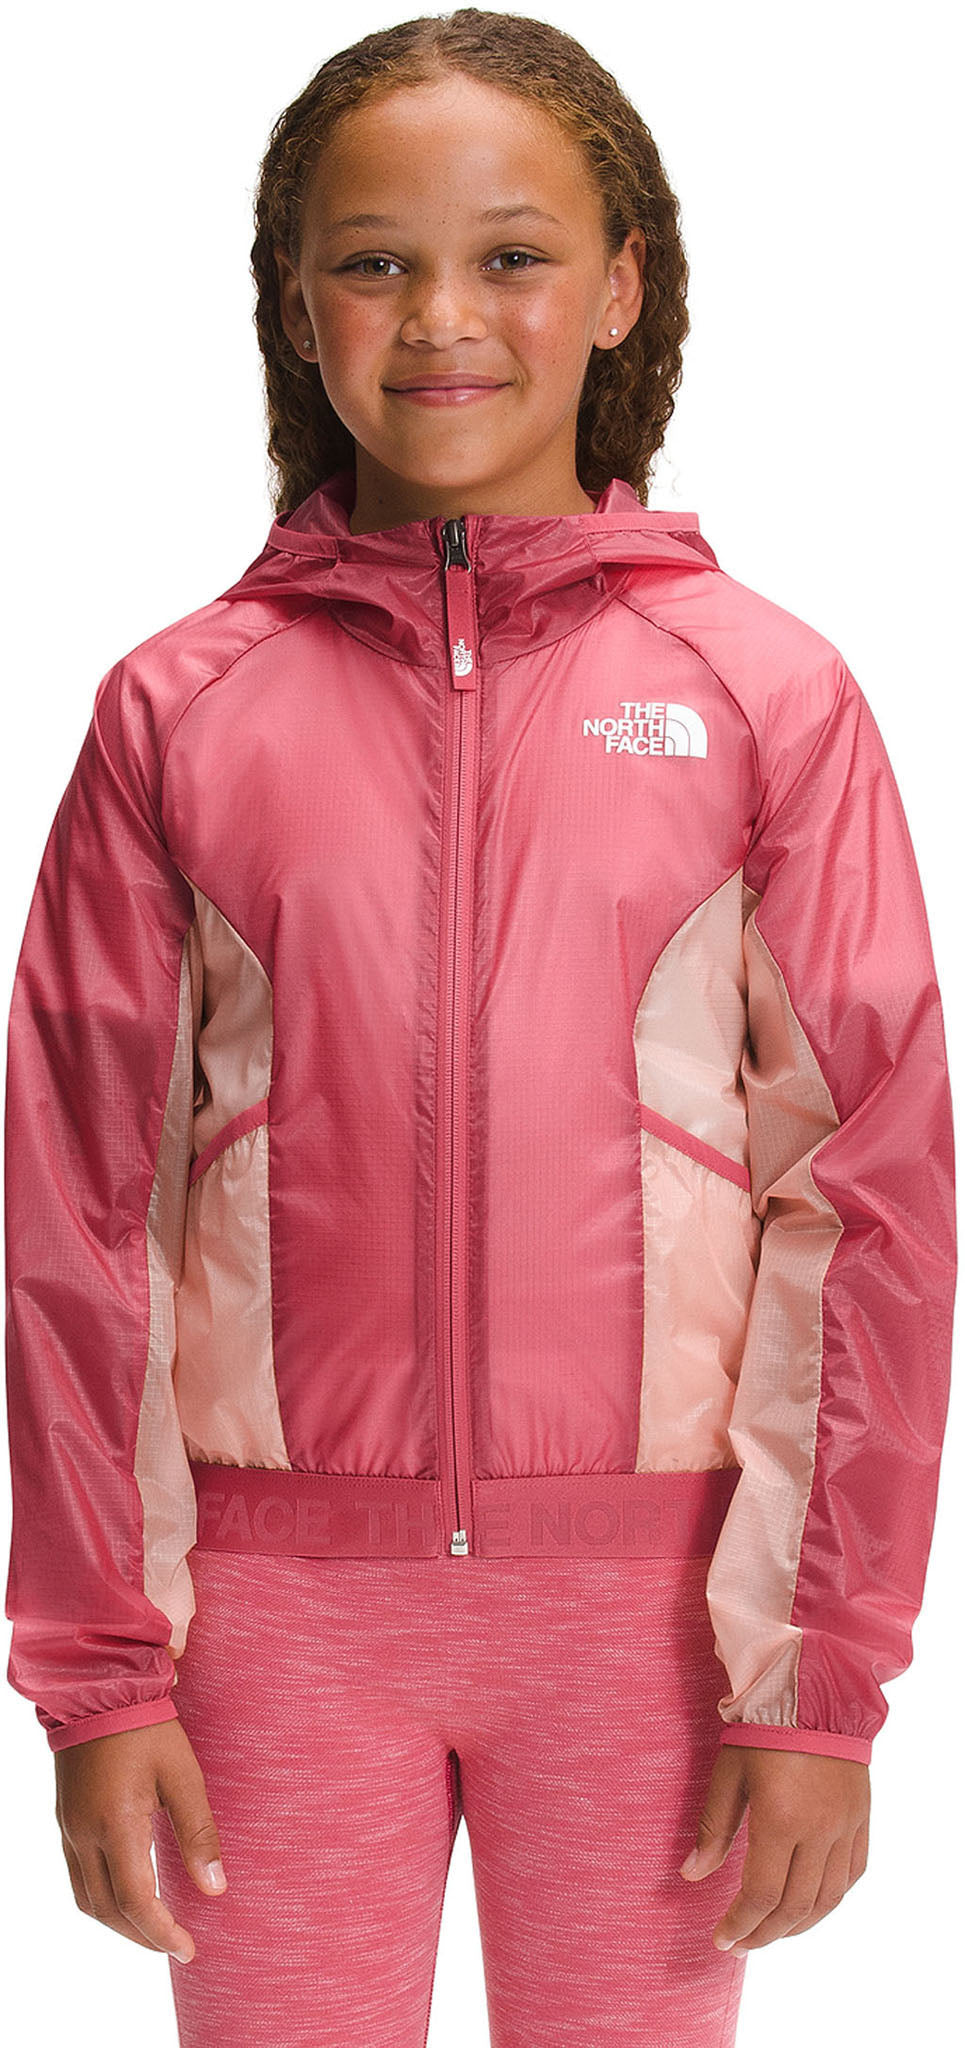 North Face Windwall 1 - Women's Review